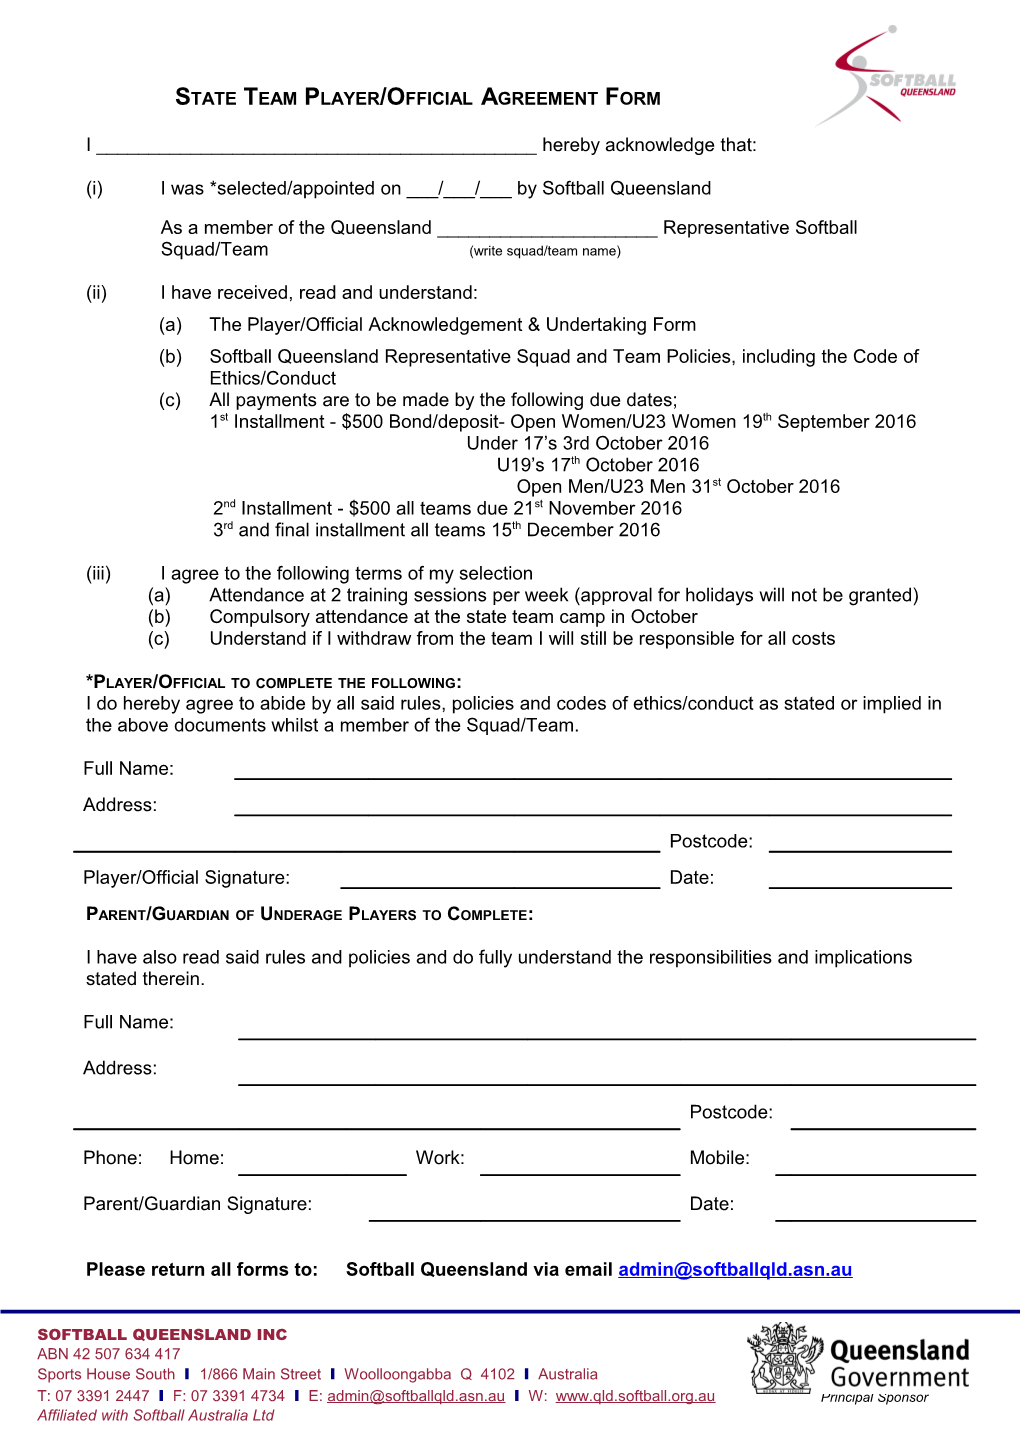 State Team Player/Official Agreement Form